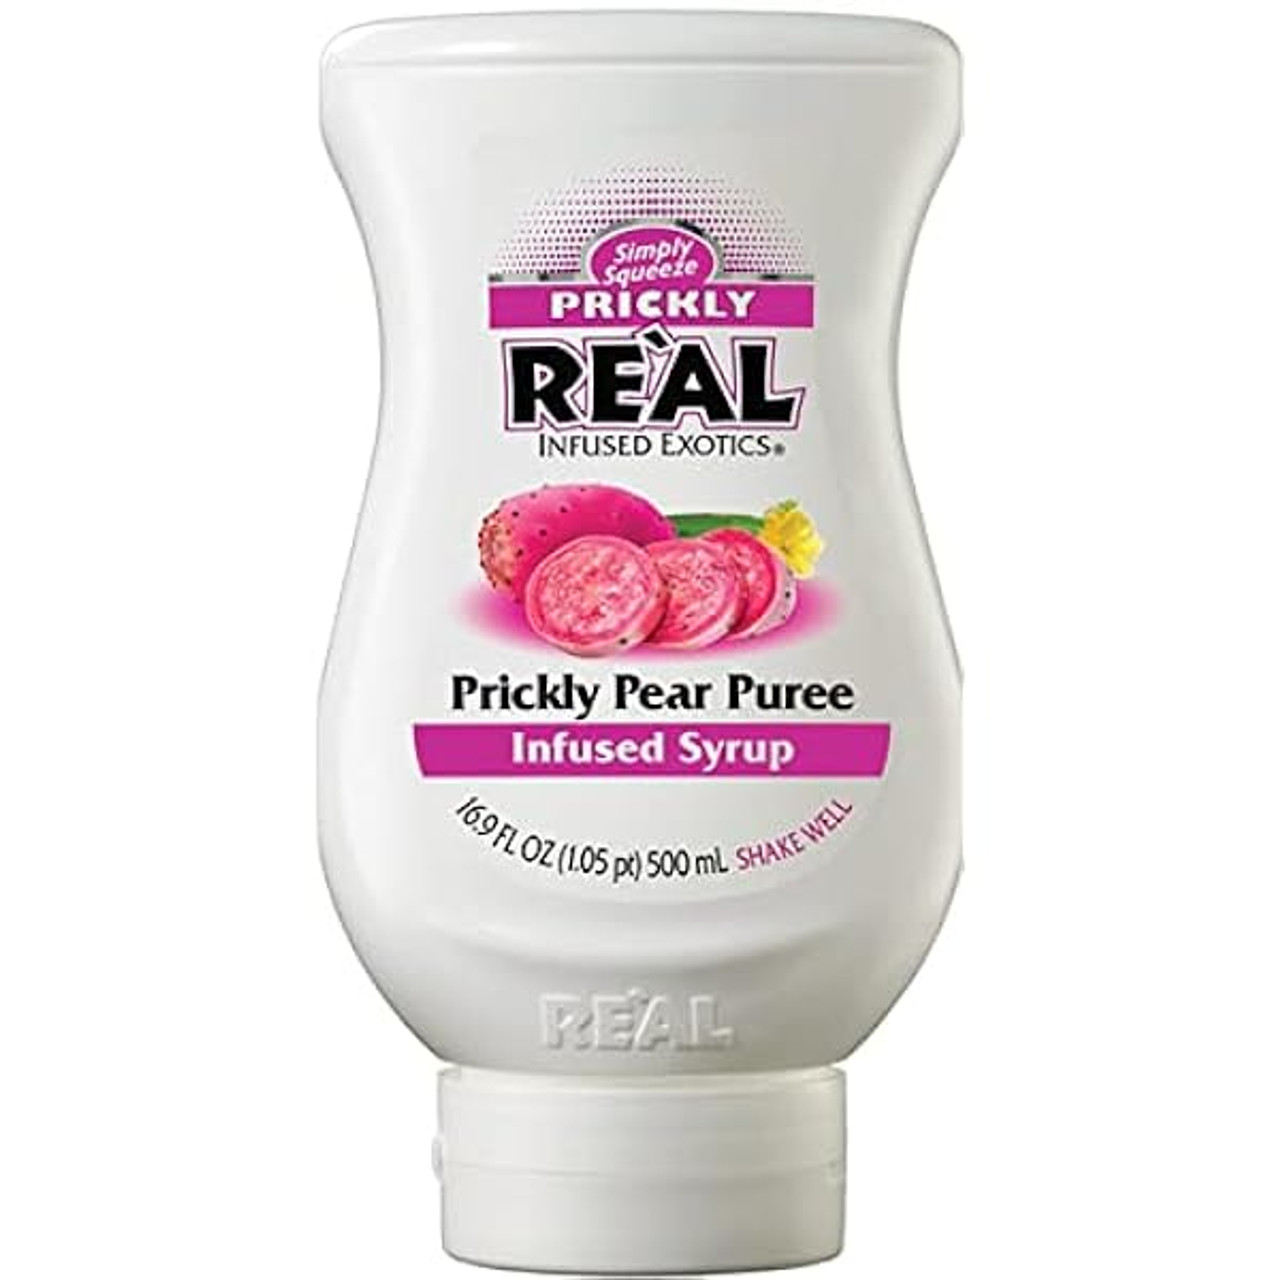 Real Prickly Pear Puree Infused Syrup 16.9 fl. oz/500ml